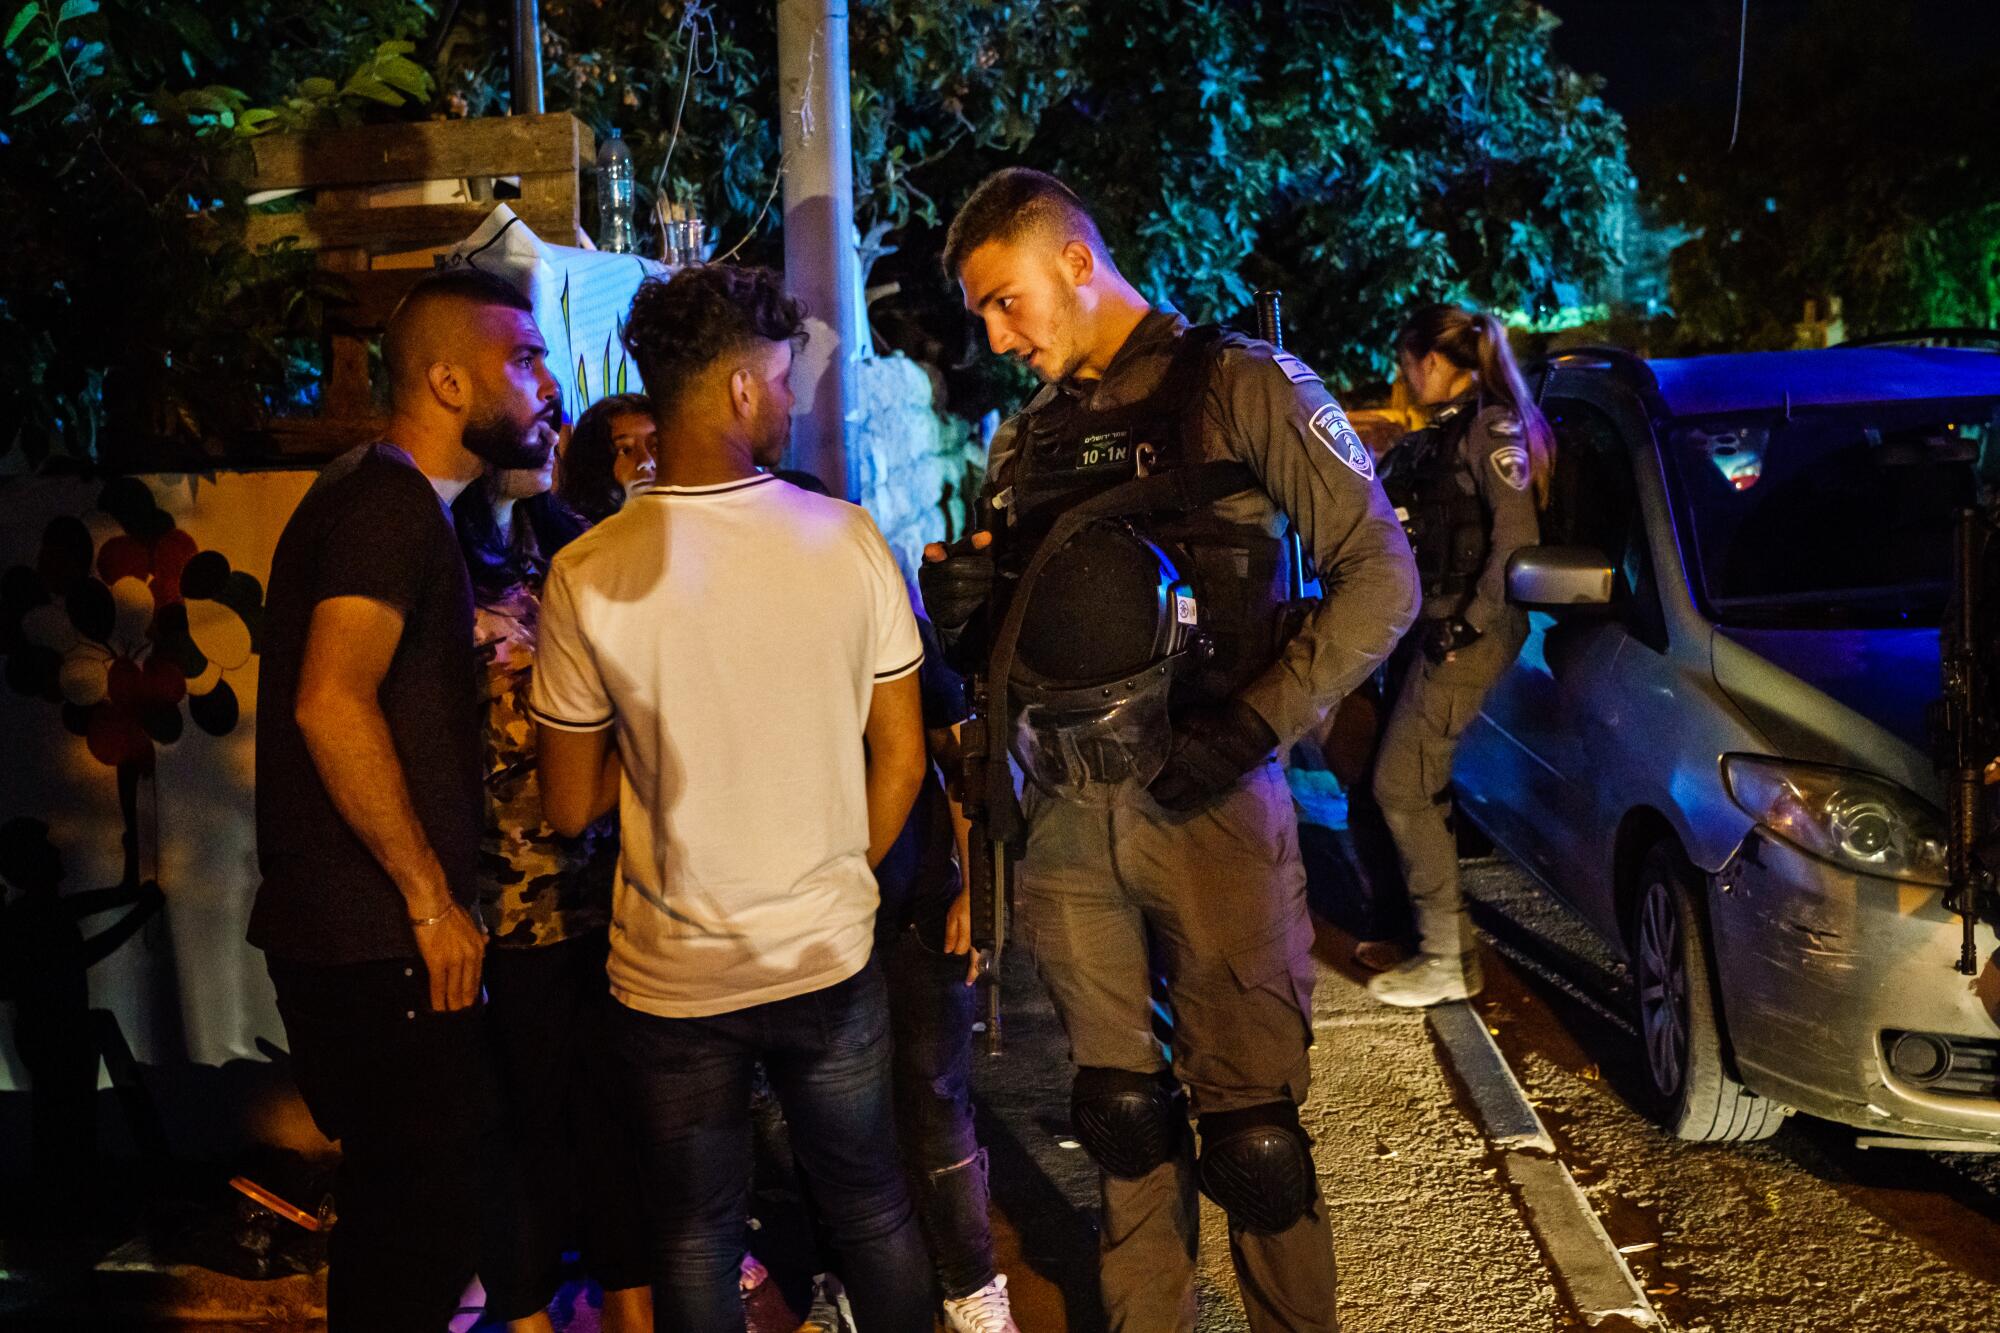 An Israeli security officer questions young residents on the streets of the Sheikh Jarrah neighborhood in East Jerusalem